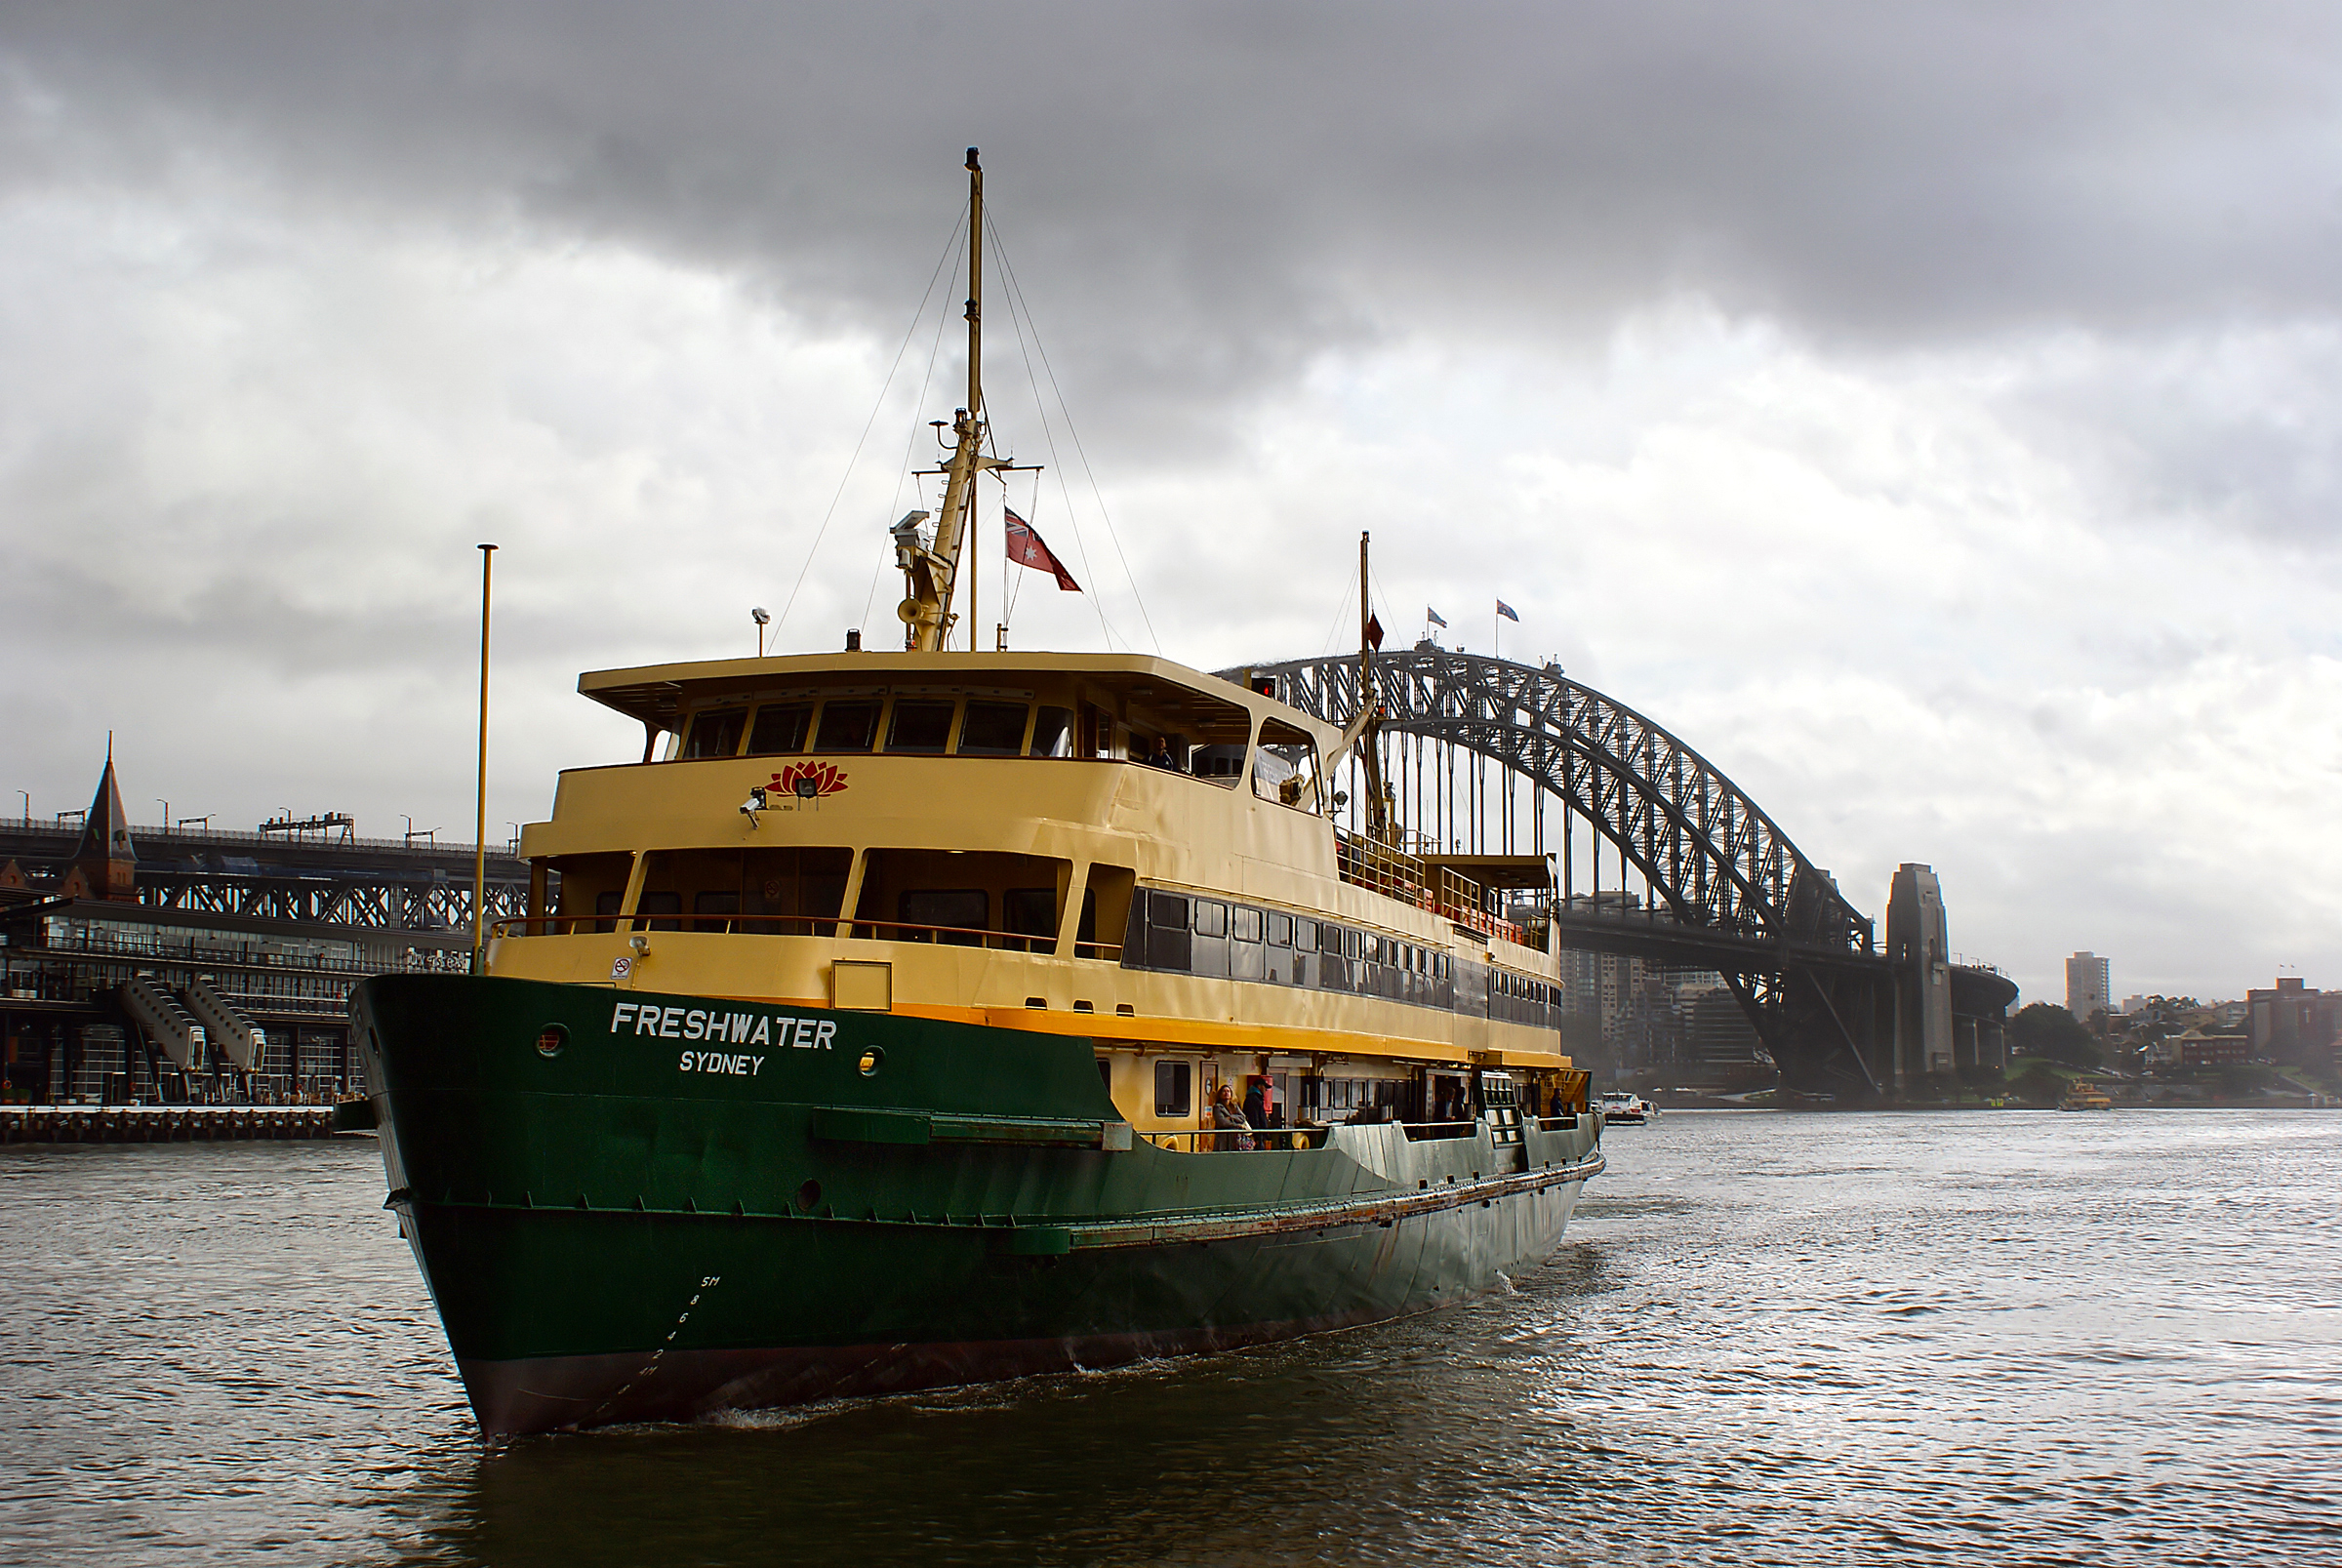 sea-boat-river-ship-transport-vehicle-sydney-harbor-cargo-ship-waterway-ferry-channel-tugboat-sydneyharbourbridge-watercraft-steamboat-fishing-vessel-passenger-ship-freight-transport-ocean-liner-passangerservices-506214